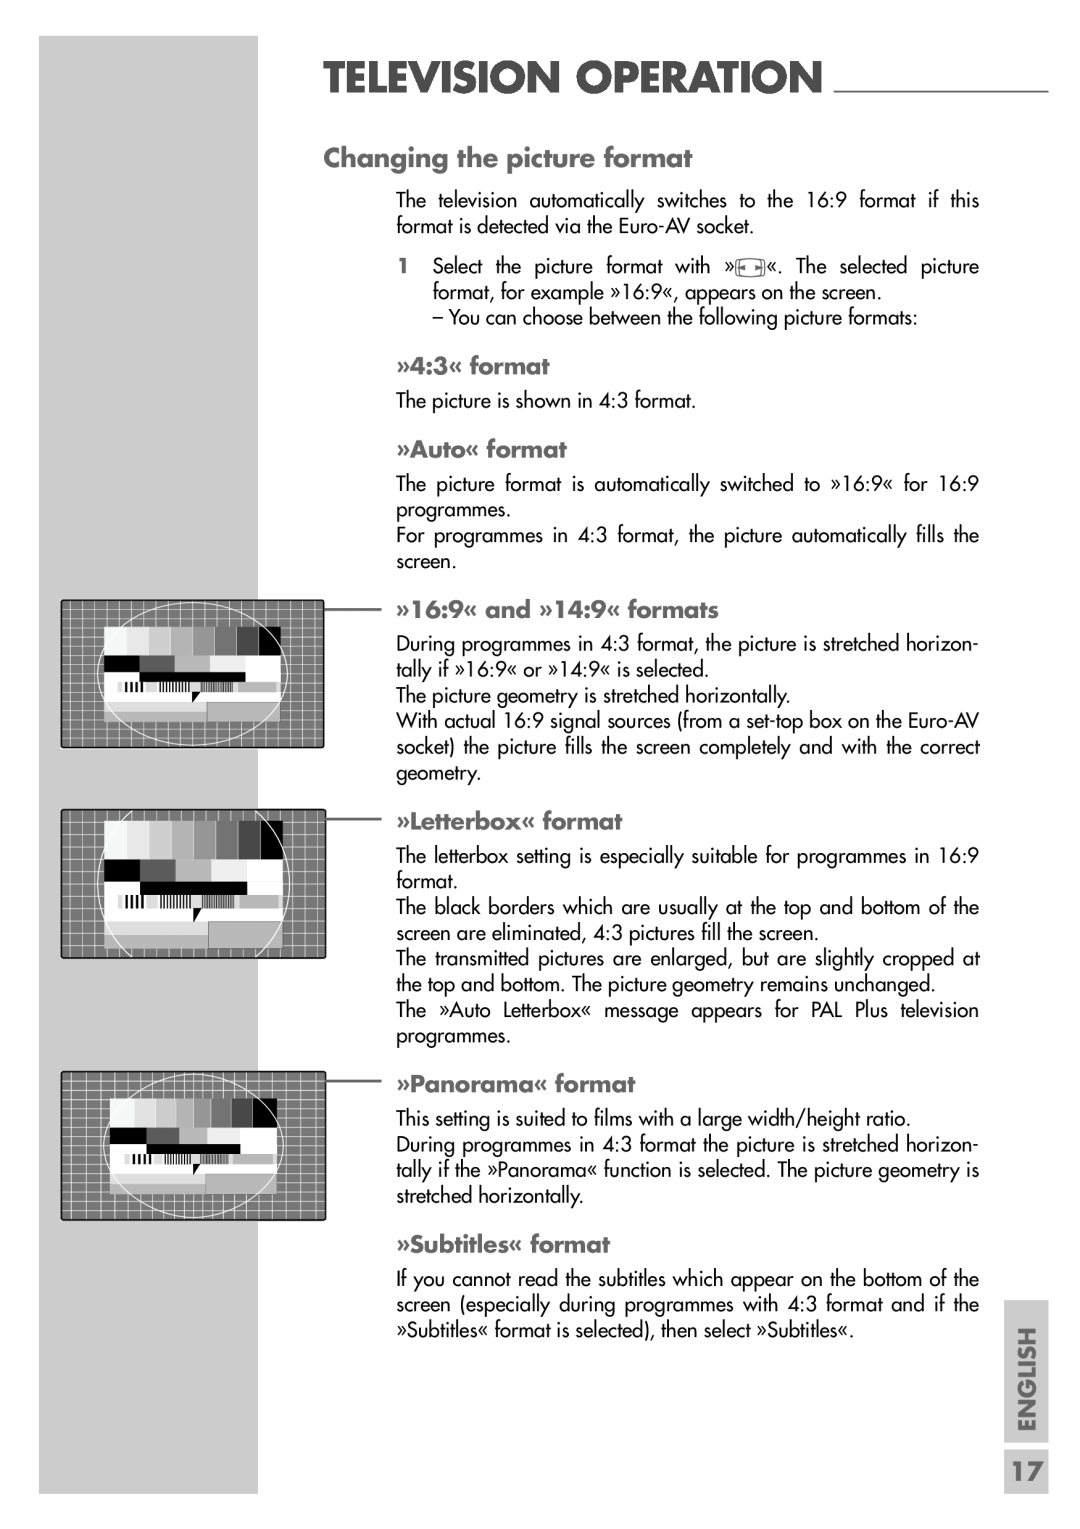 Grundig LXW 68-8720 Changing the picture format, »43« format, »Auto« format, »169« and »149« formats, »Letterbox« format 